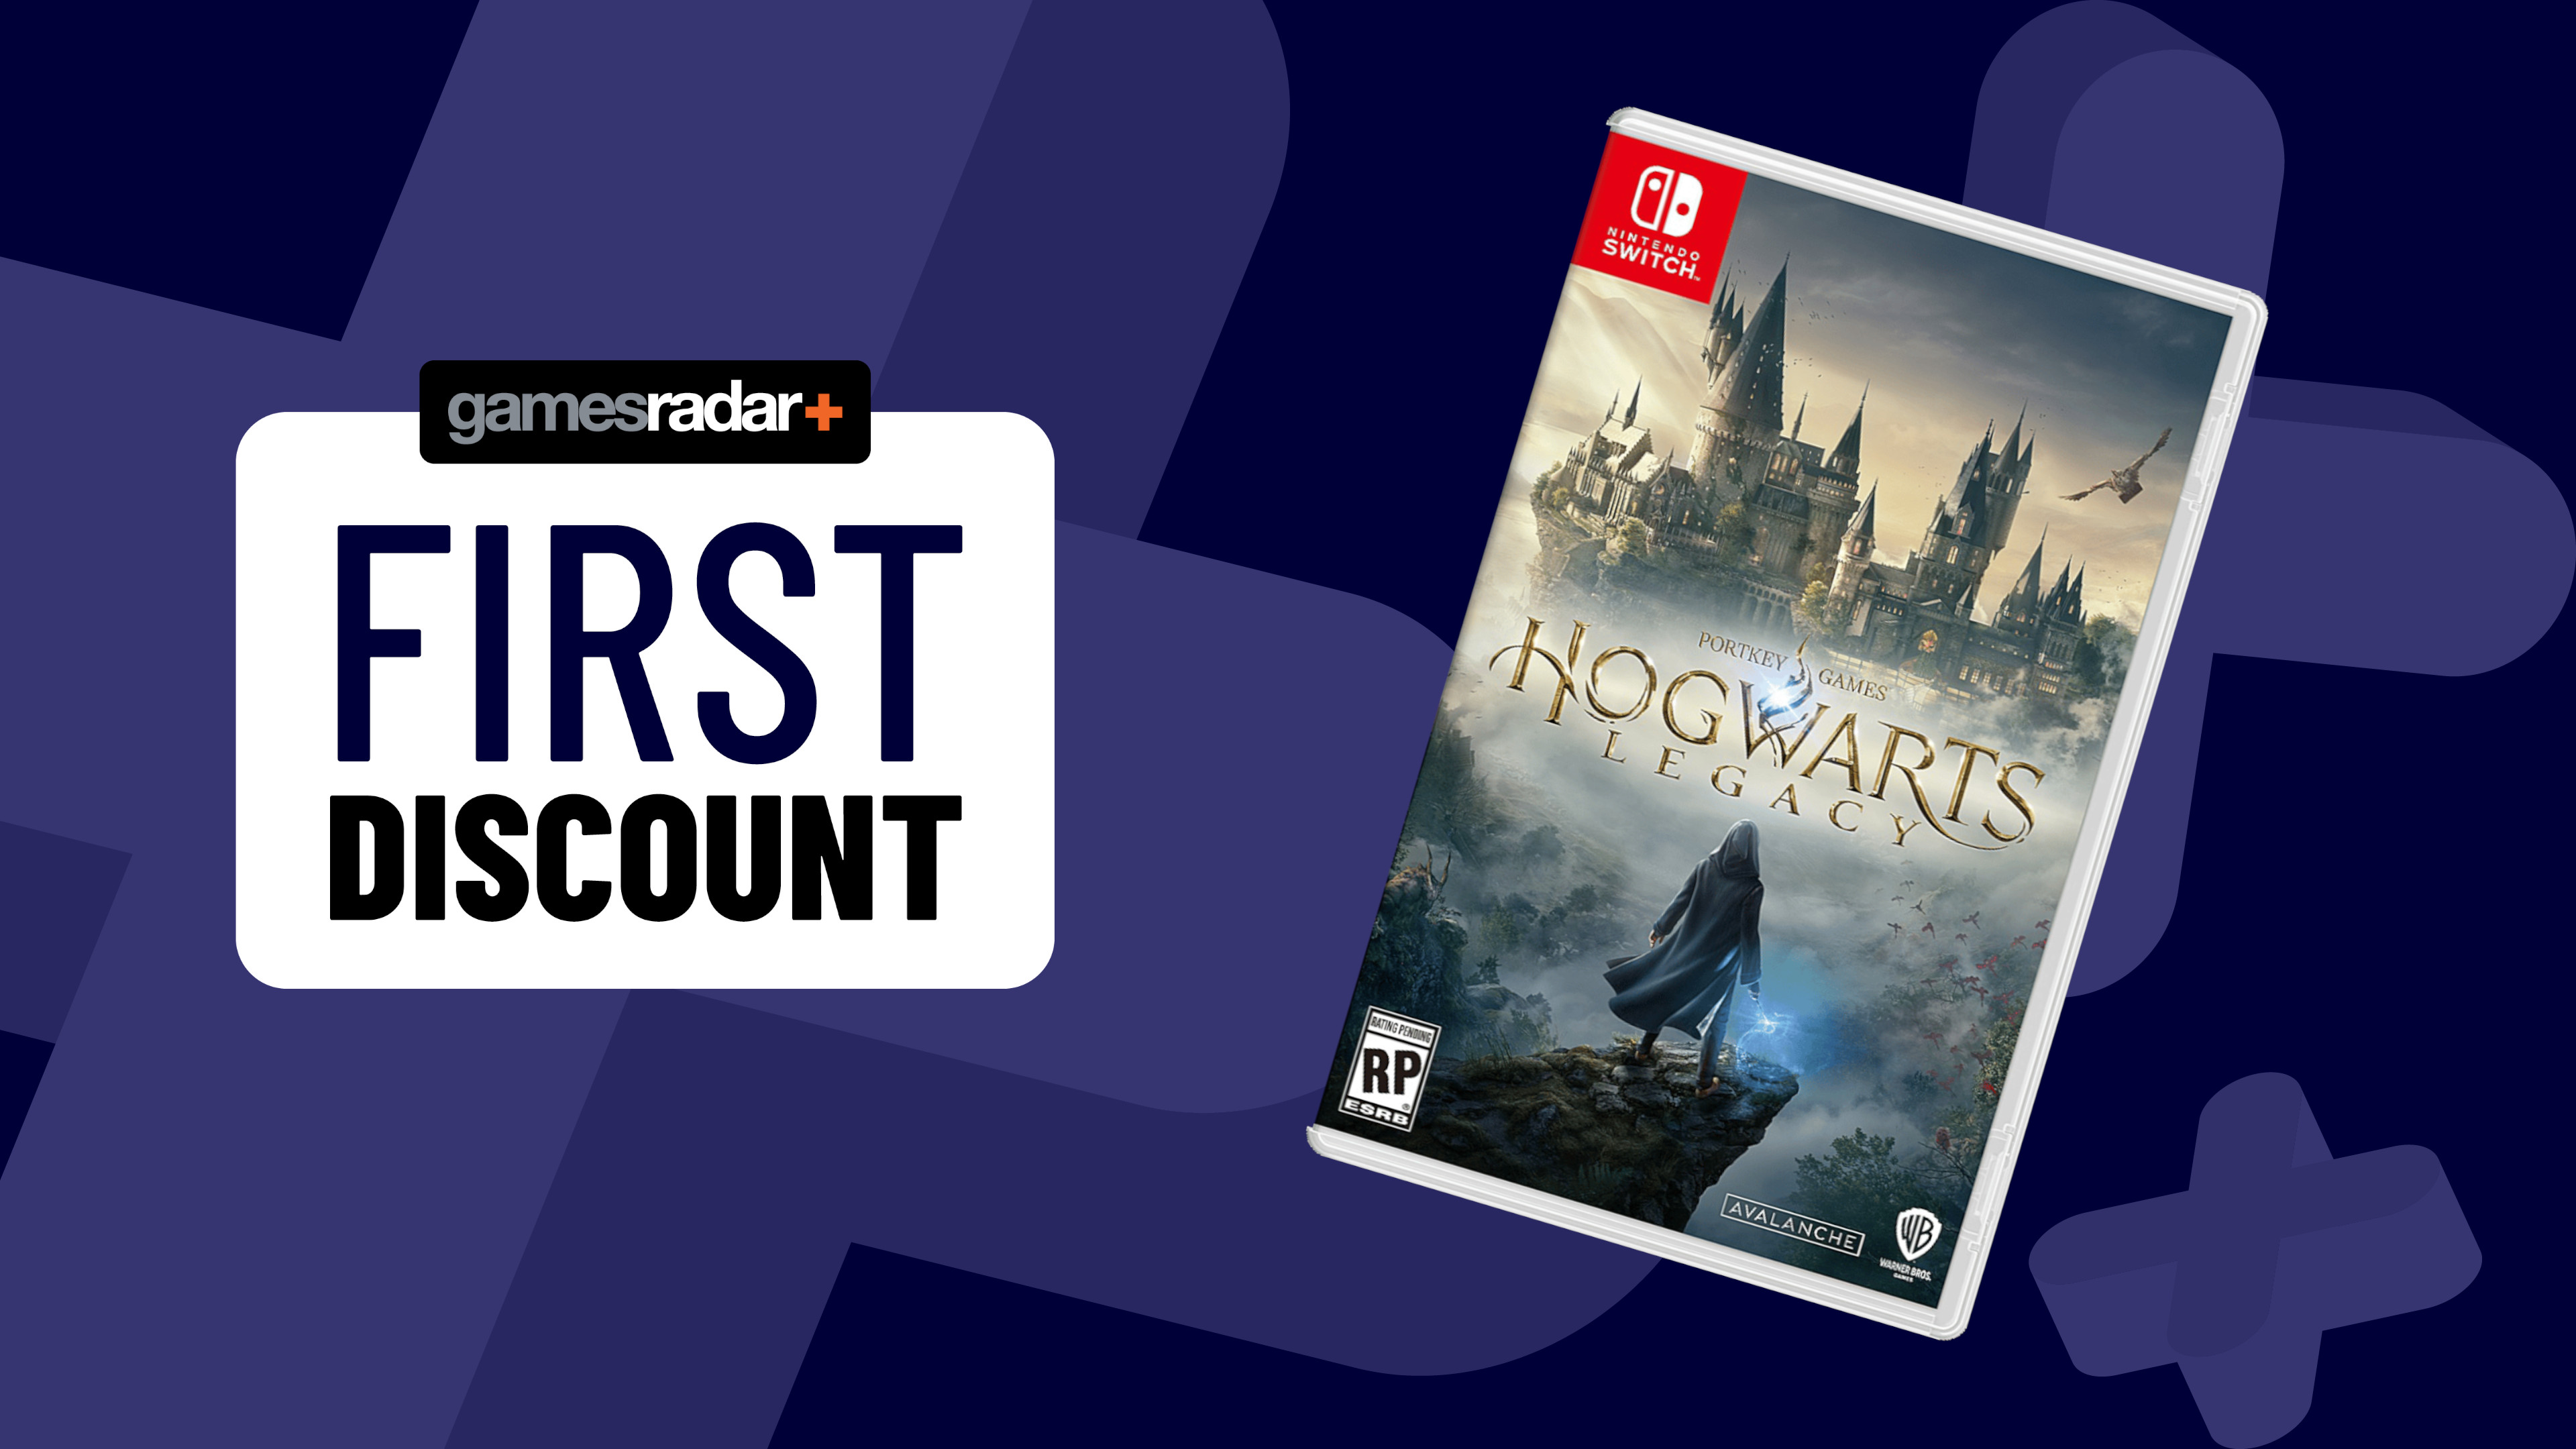 Hogwarts Legacy just got its first discount on Nintendo Switch - but you'll  have to move fast